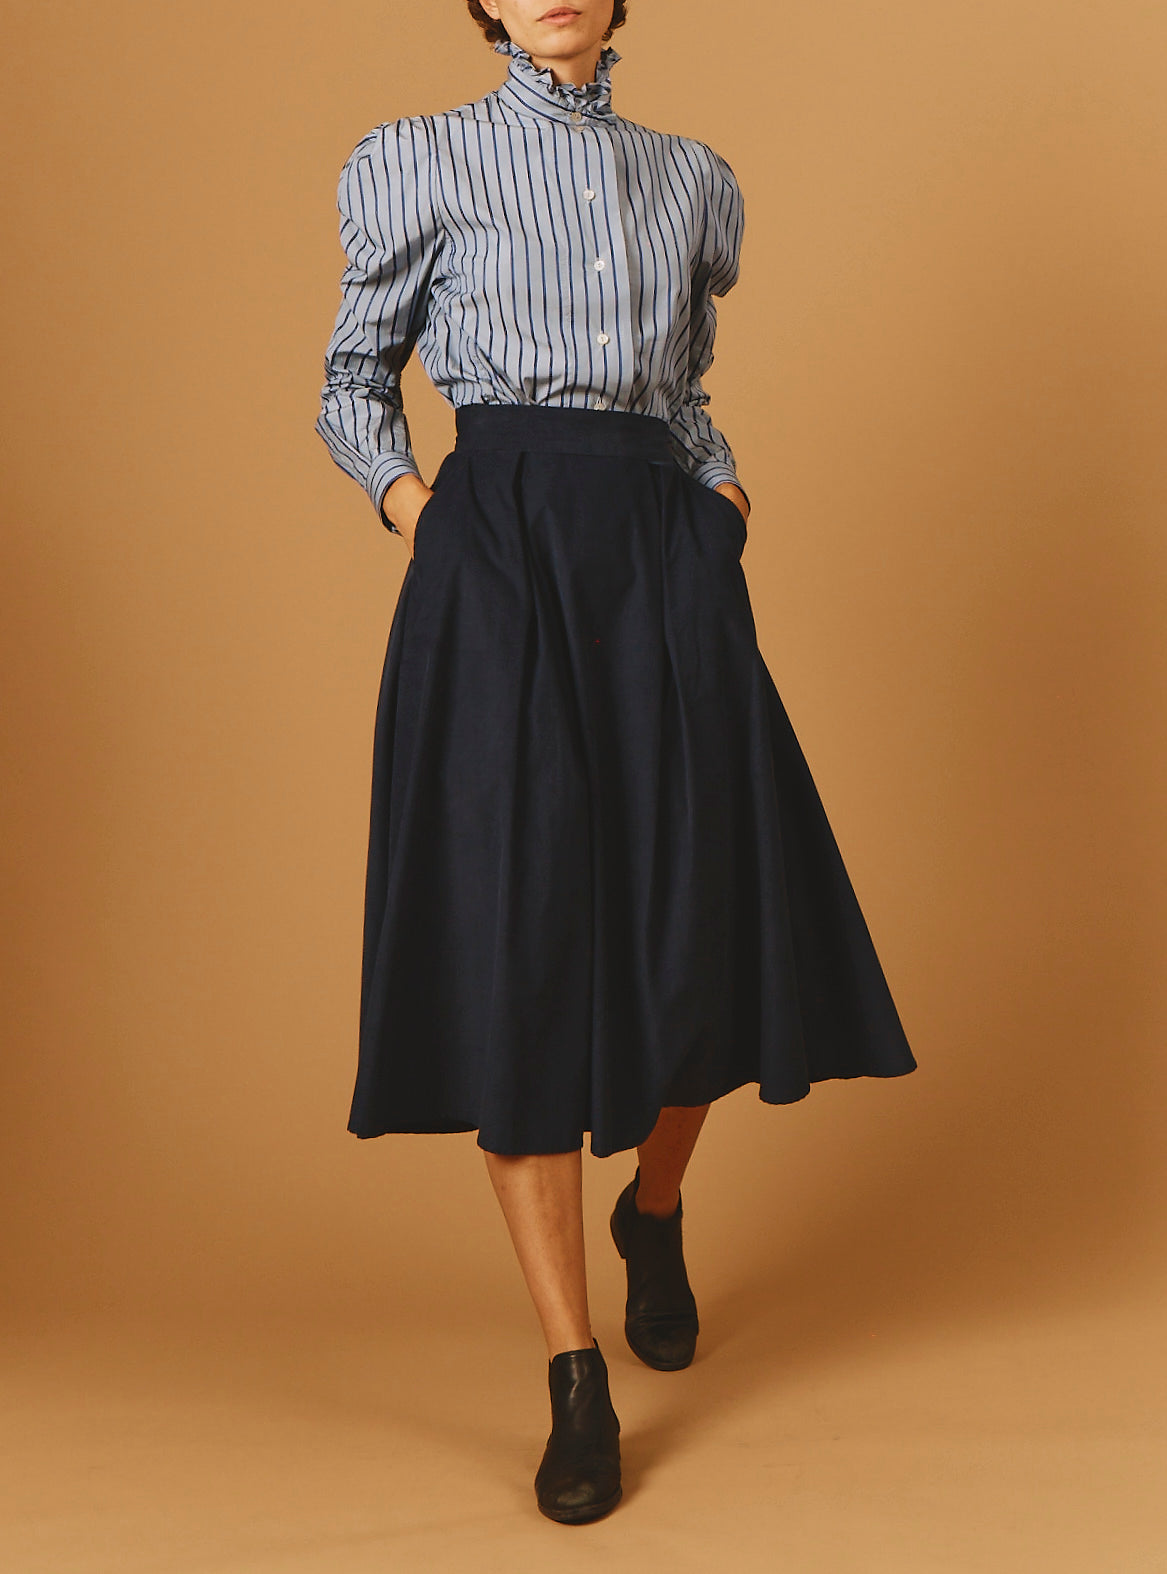 Large view of Wind Grey Navy Stripes Blouse with Wynona corduroy Skirt by Thierry Colson 